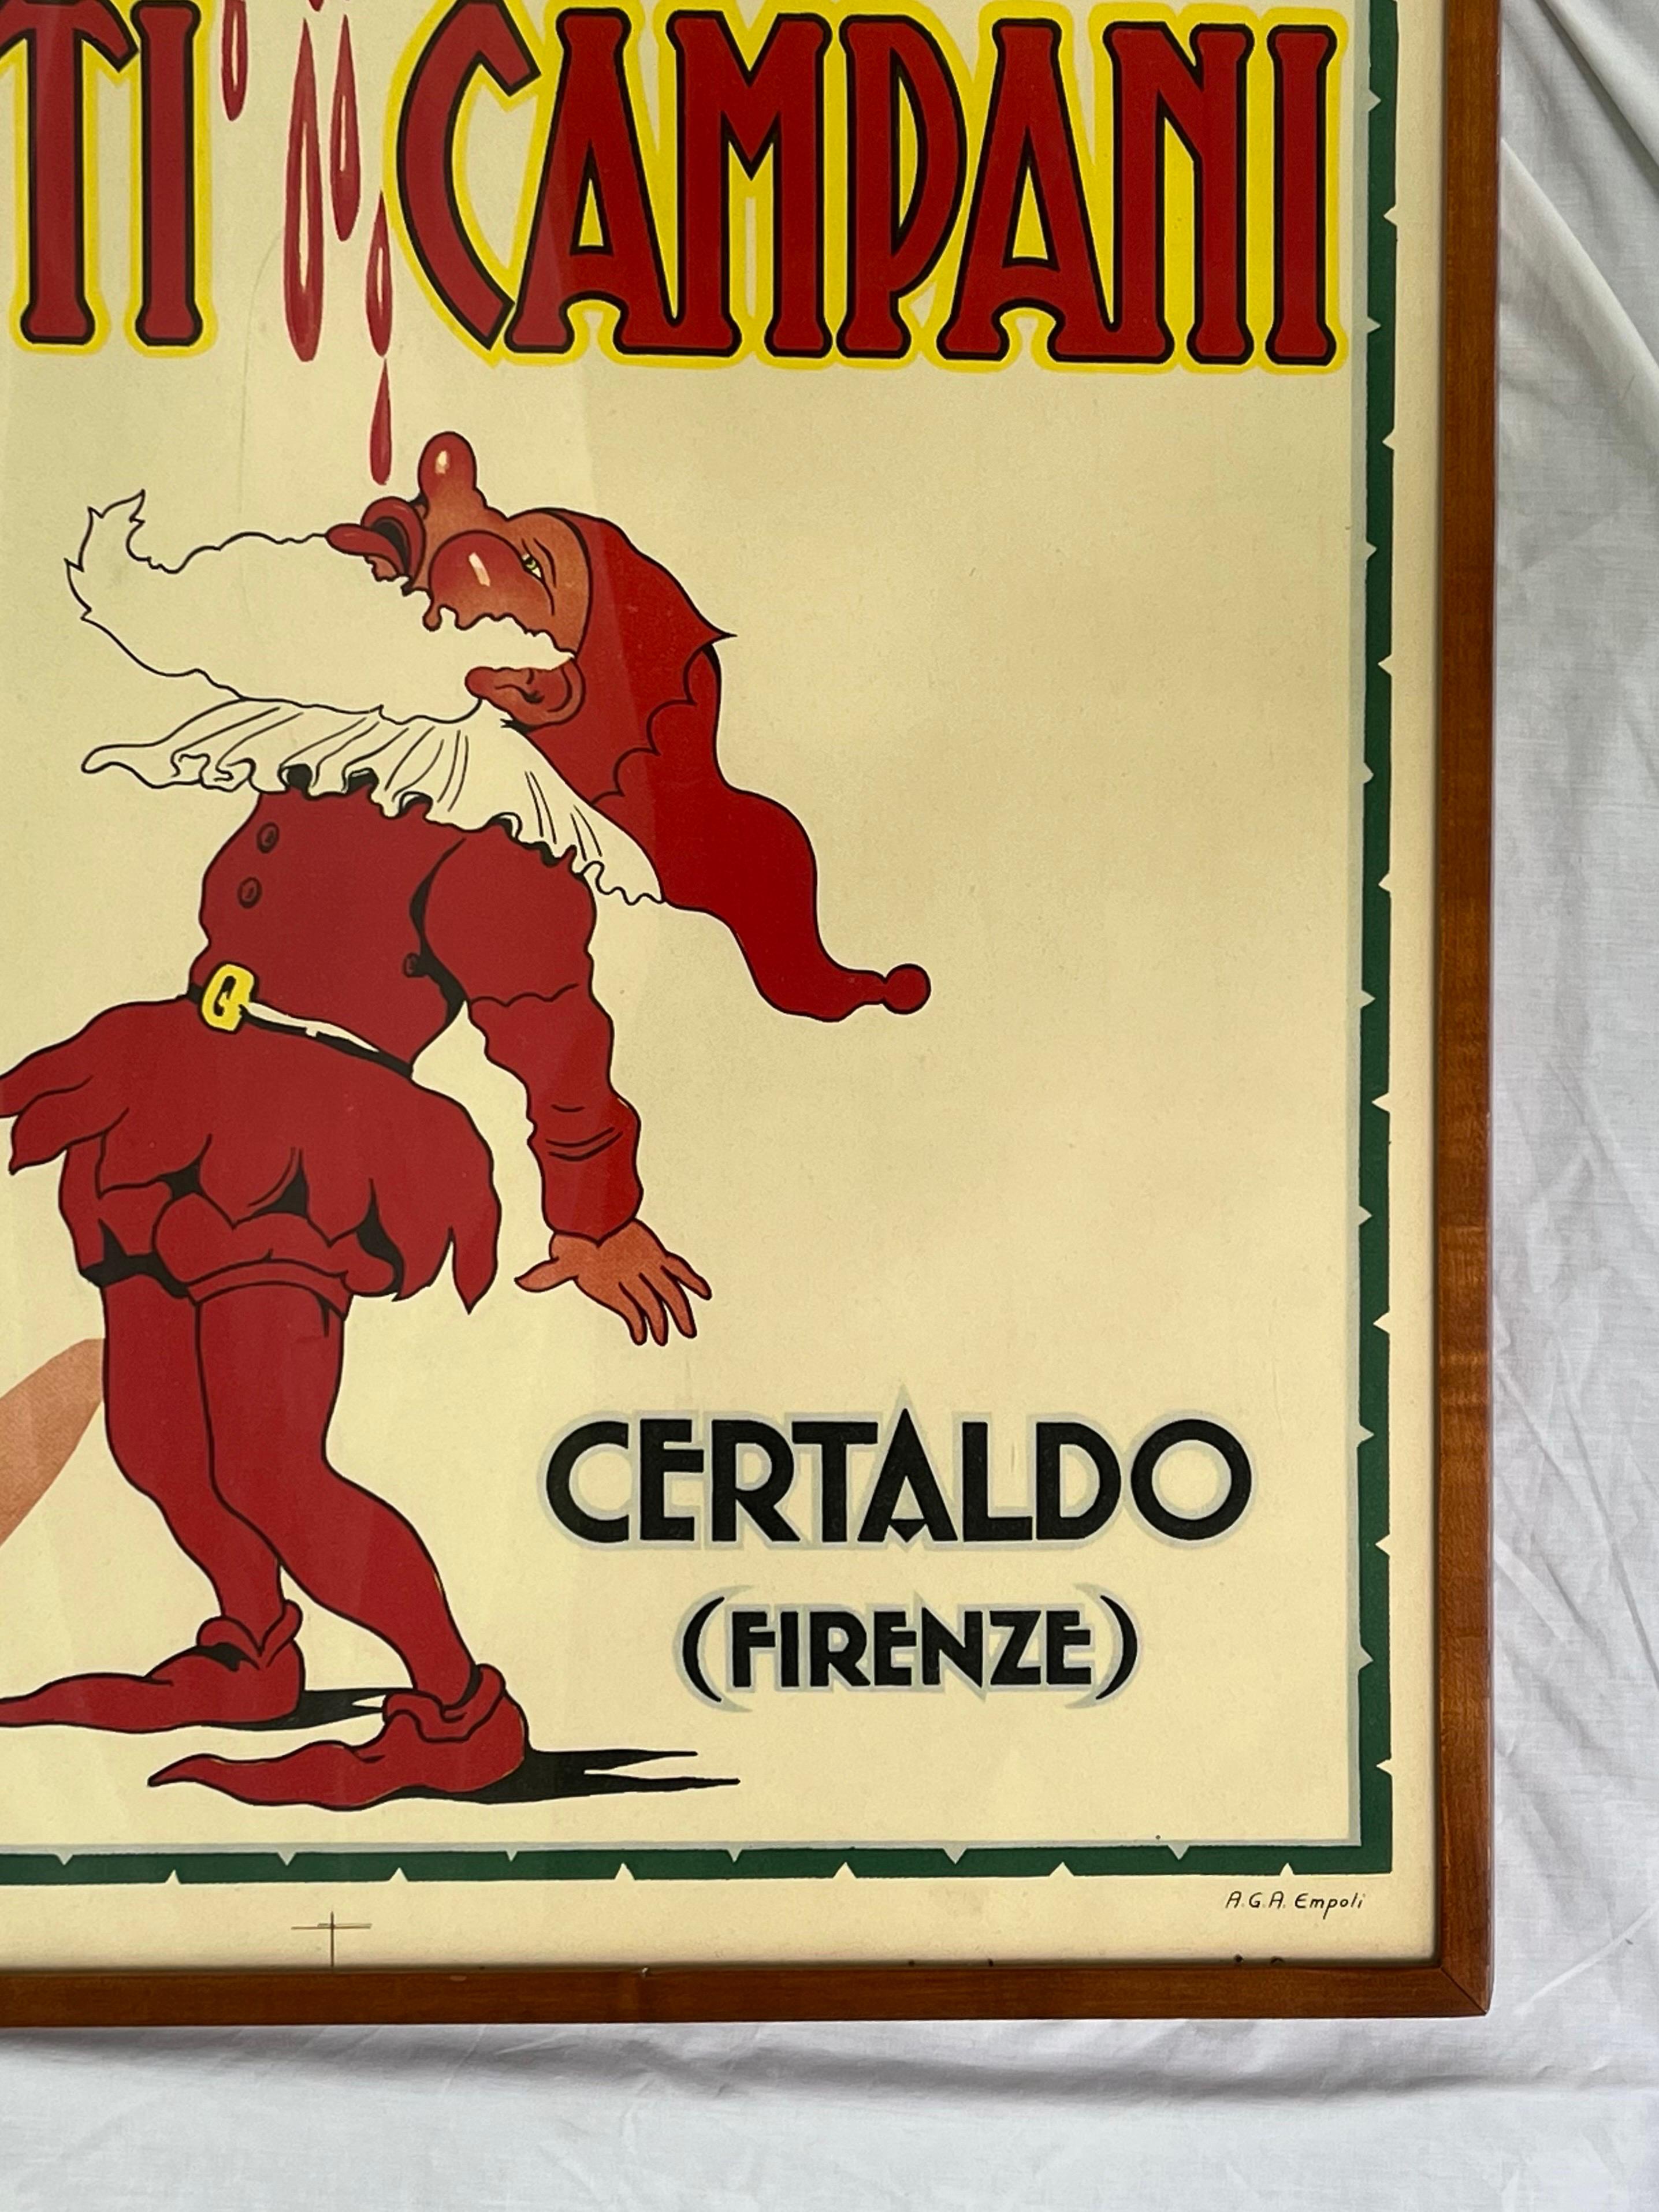 Chianti Campani Vintage Midcentury Italian Poster Featuring a Gnome and Wine 6